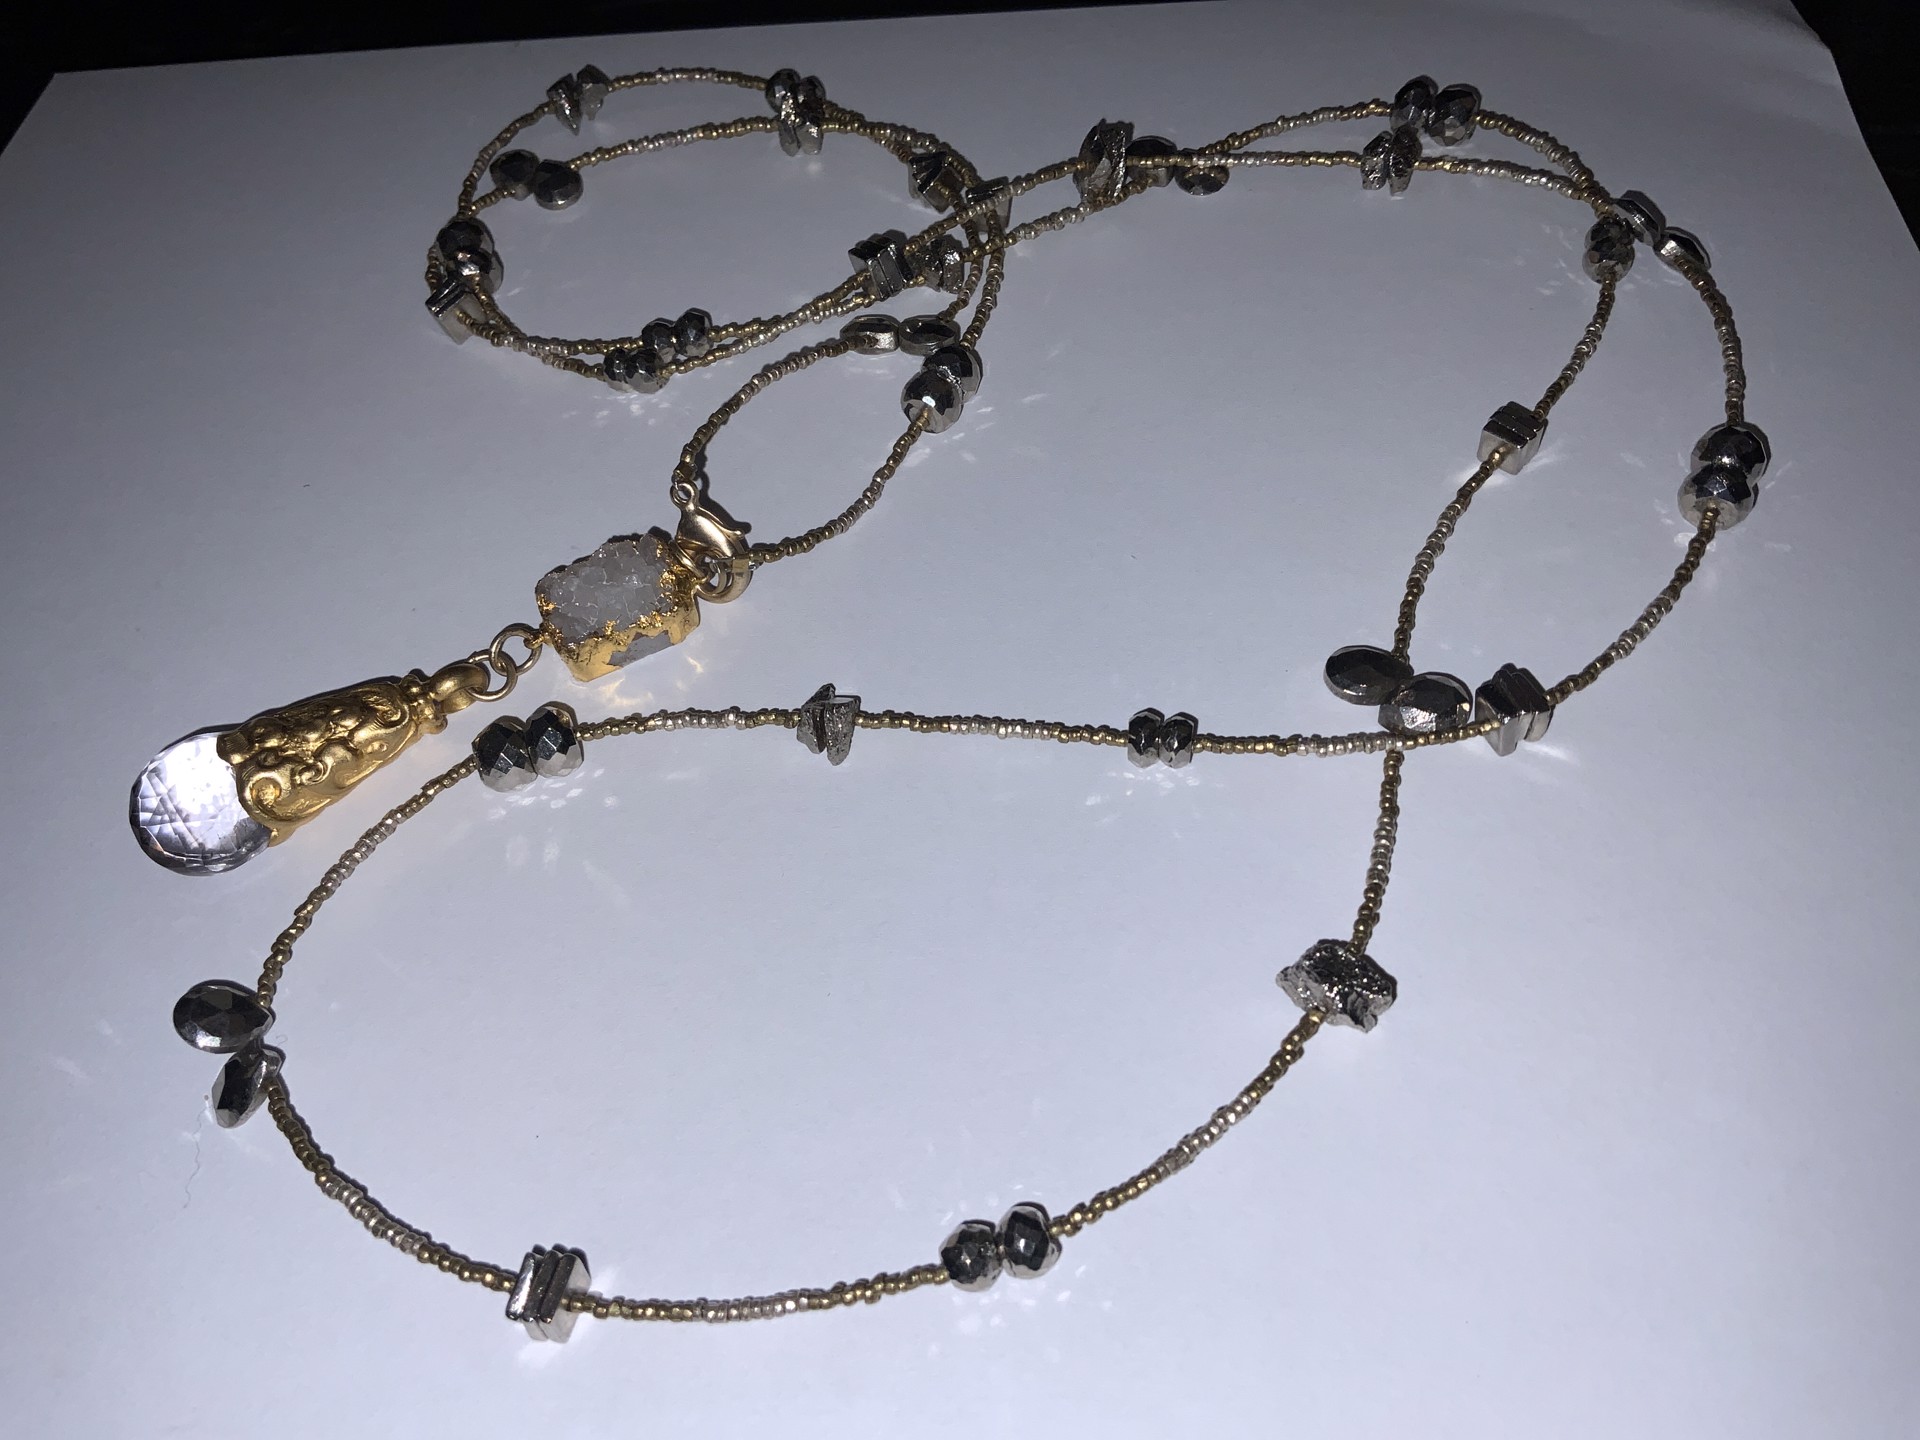 48’ Lariat Pyrite Extra Long by Bittersweet Designs